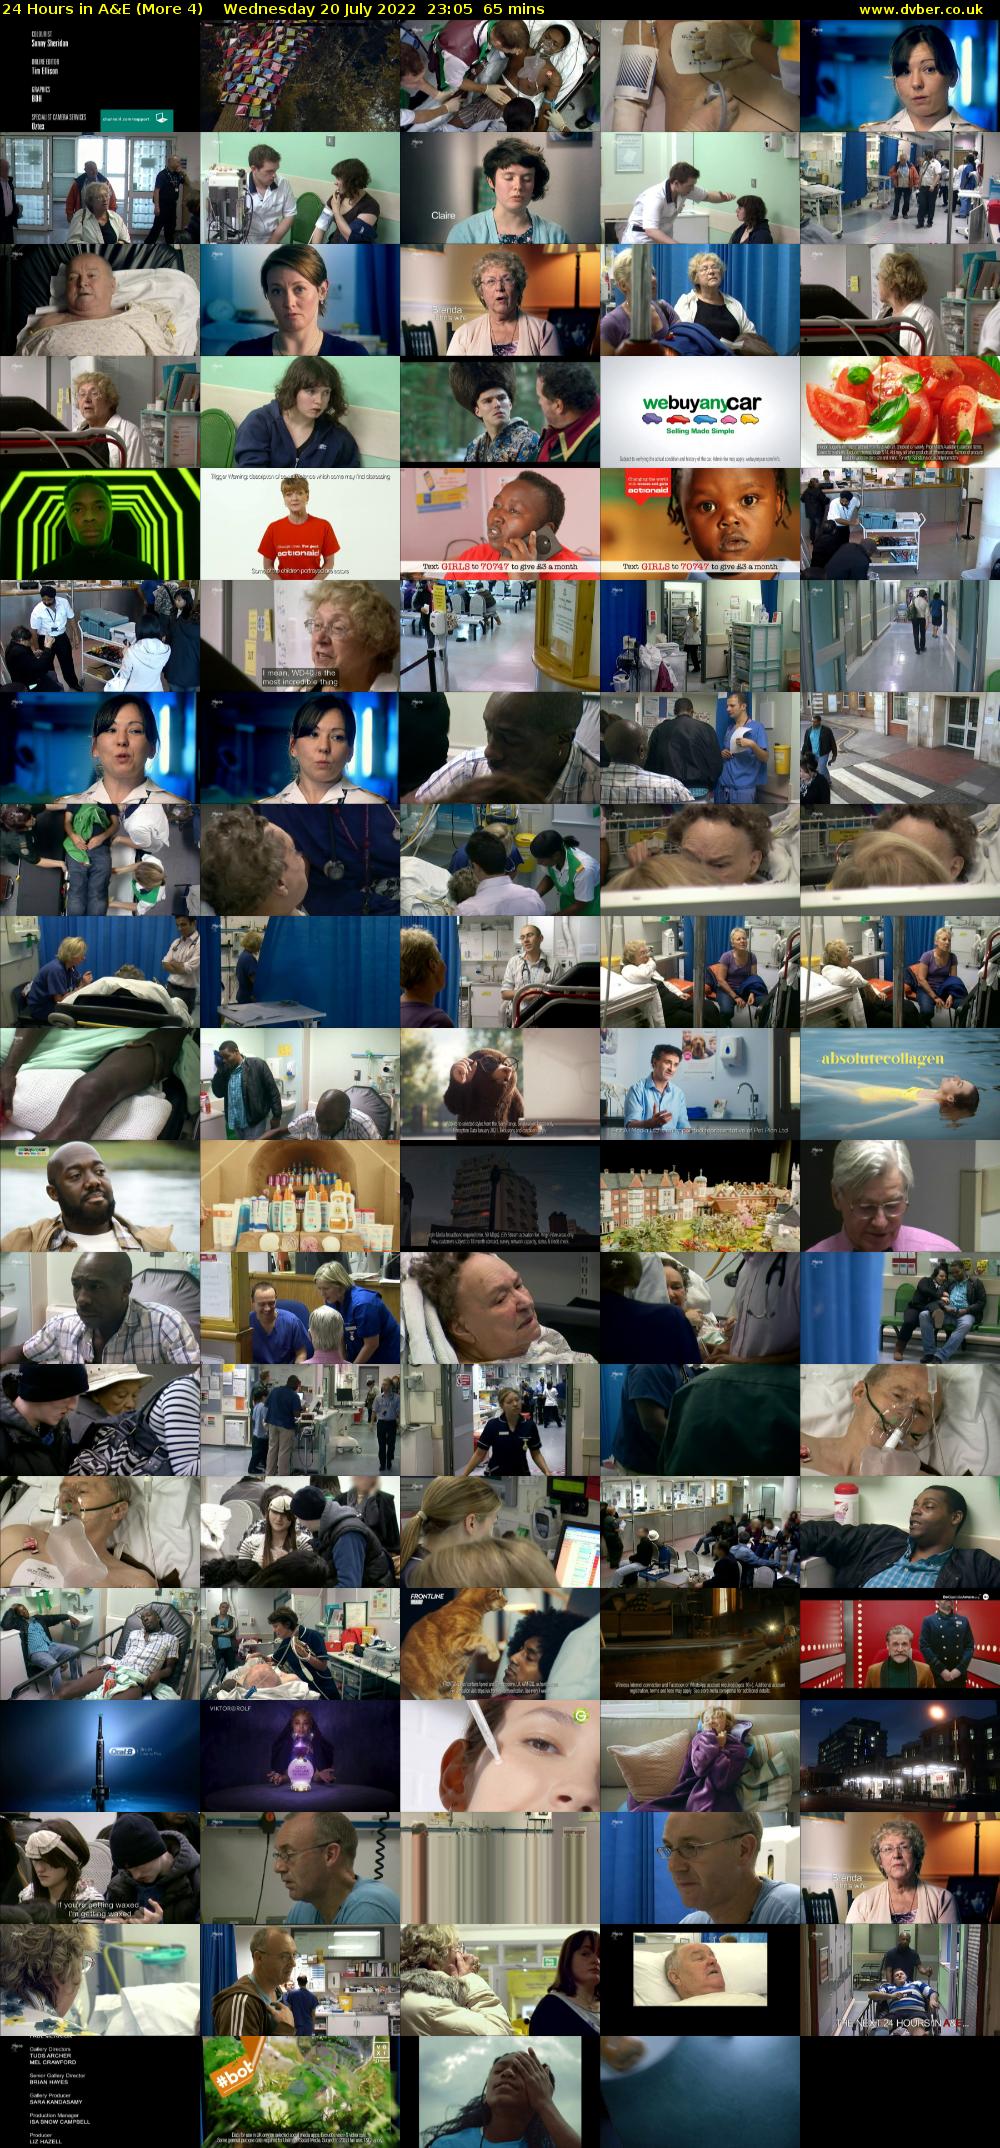 24 Hours in A&E (More 4) Wednesday 20 July 2022 23:05 - 00:10